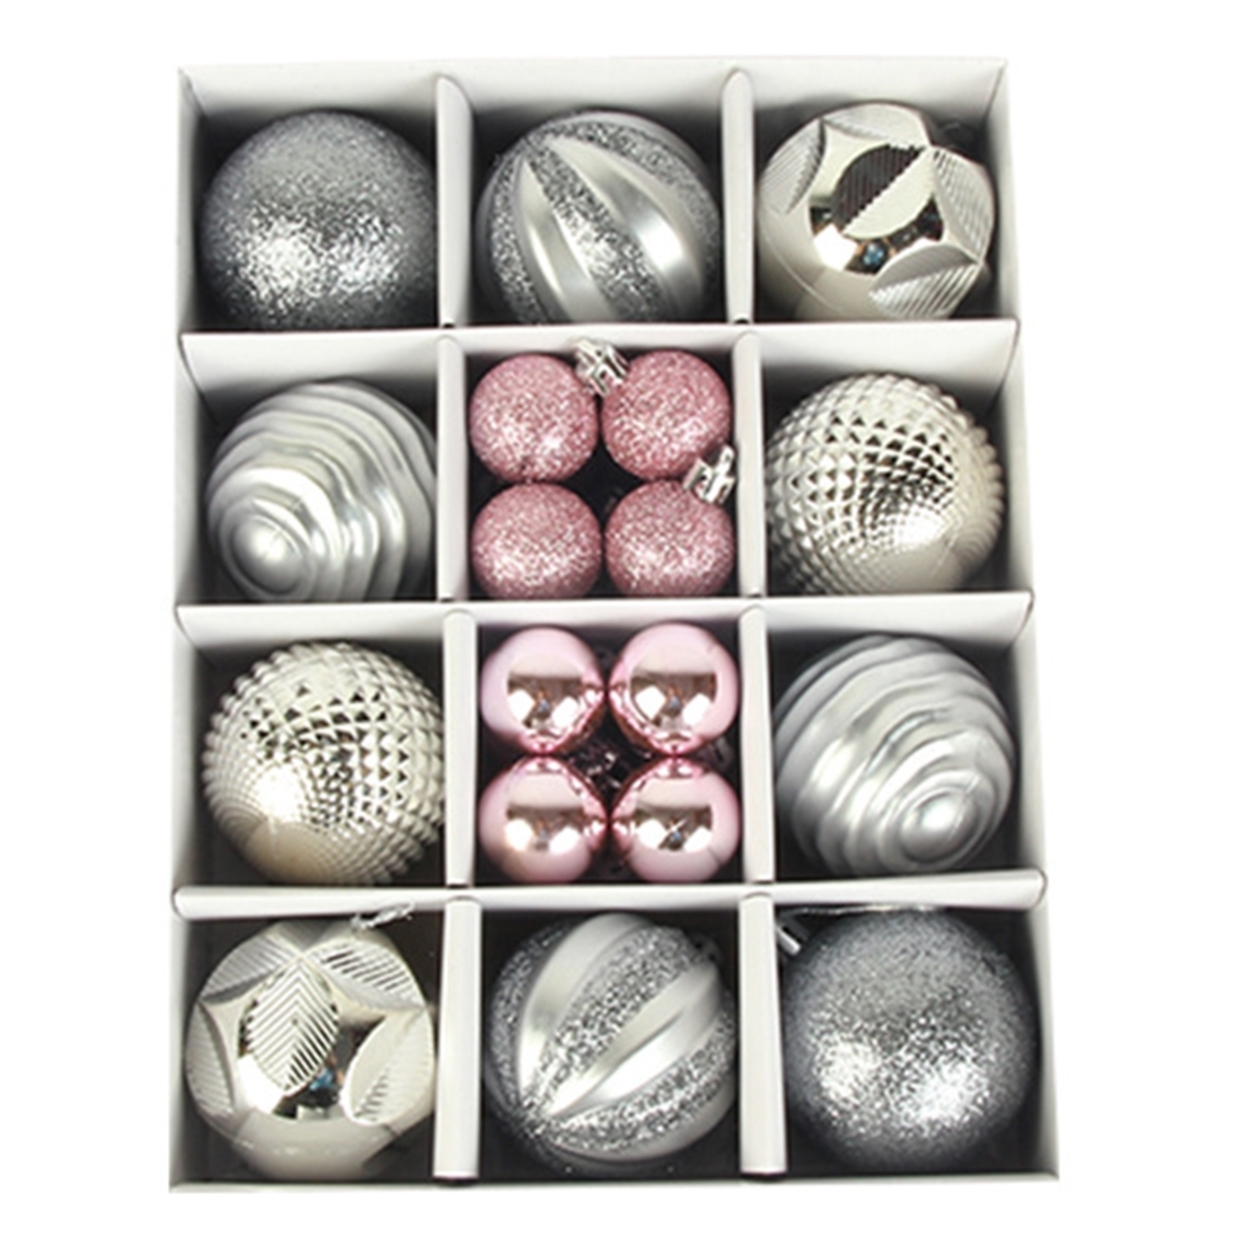 1 Set Christmas Tree Pendant Exquisite Workmanship Vintage Style Multi-color Christmas Ball Gift Box Set for Home - silver + pink